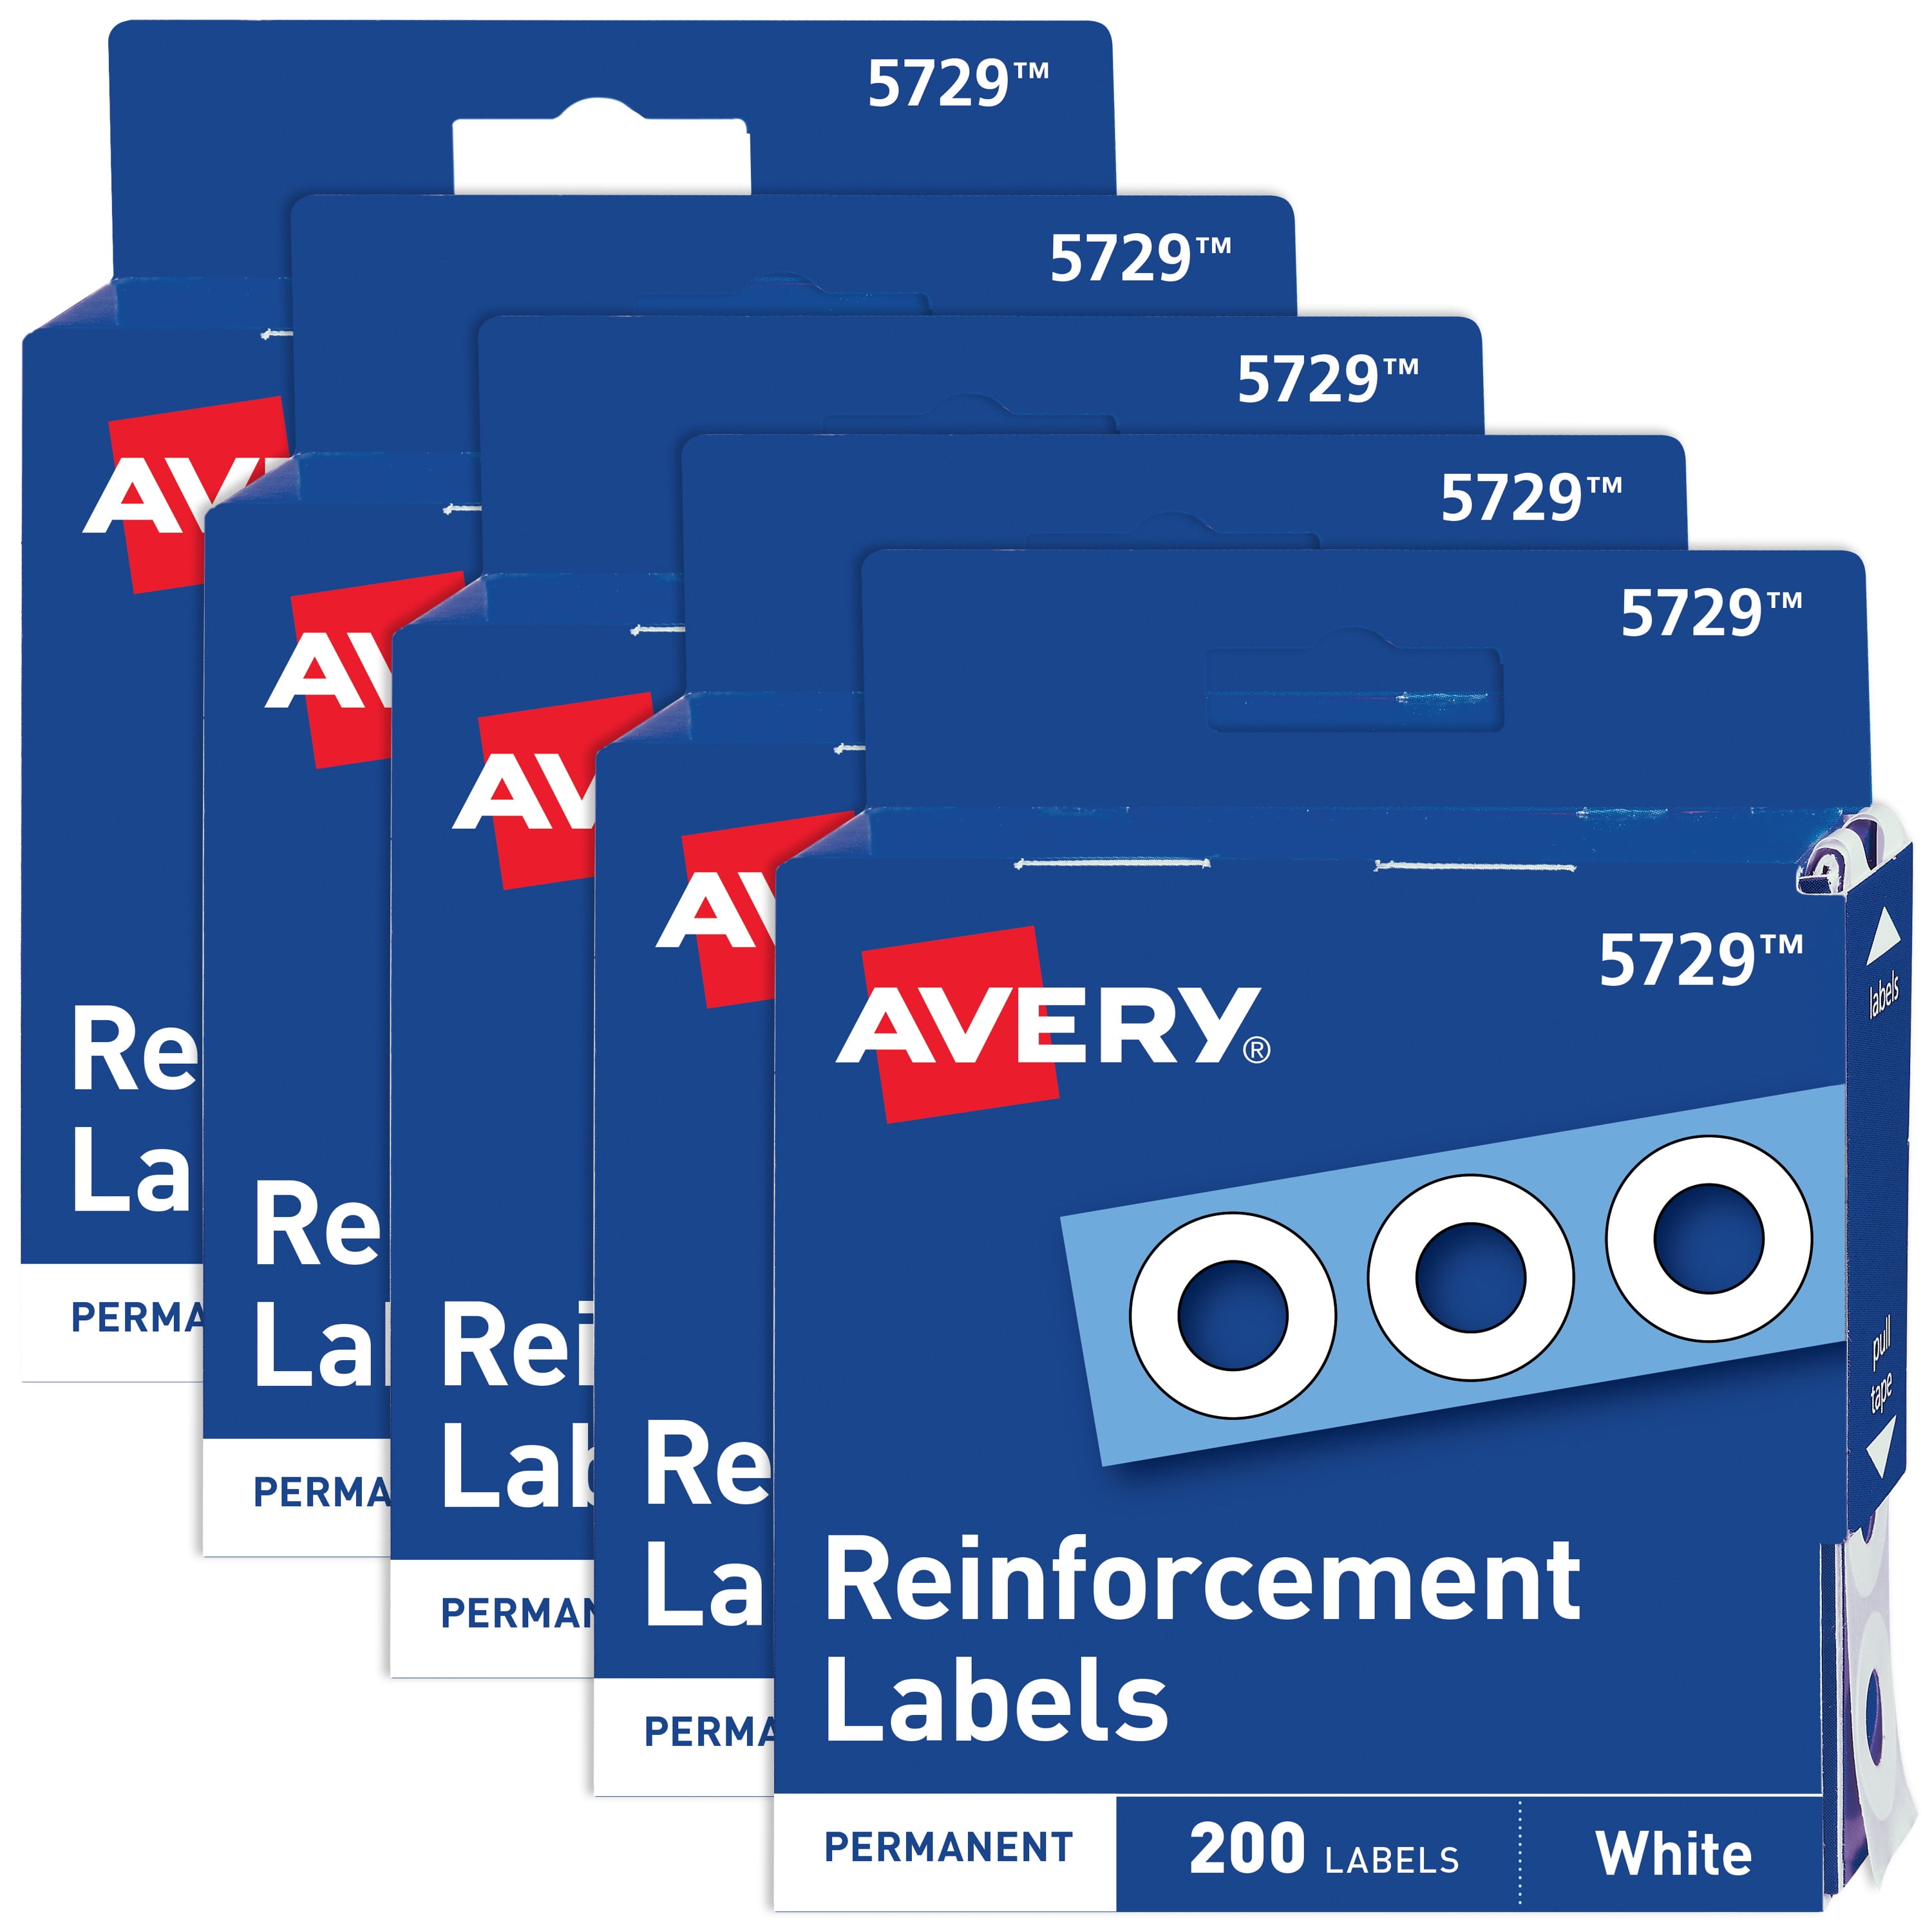 Avery Hole Reinforcements, 1/4 Dia., Clear, 1000/Pack